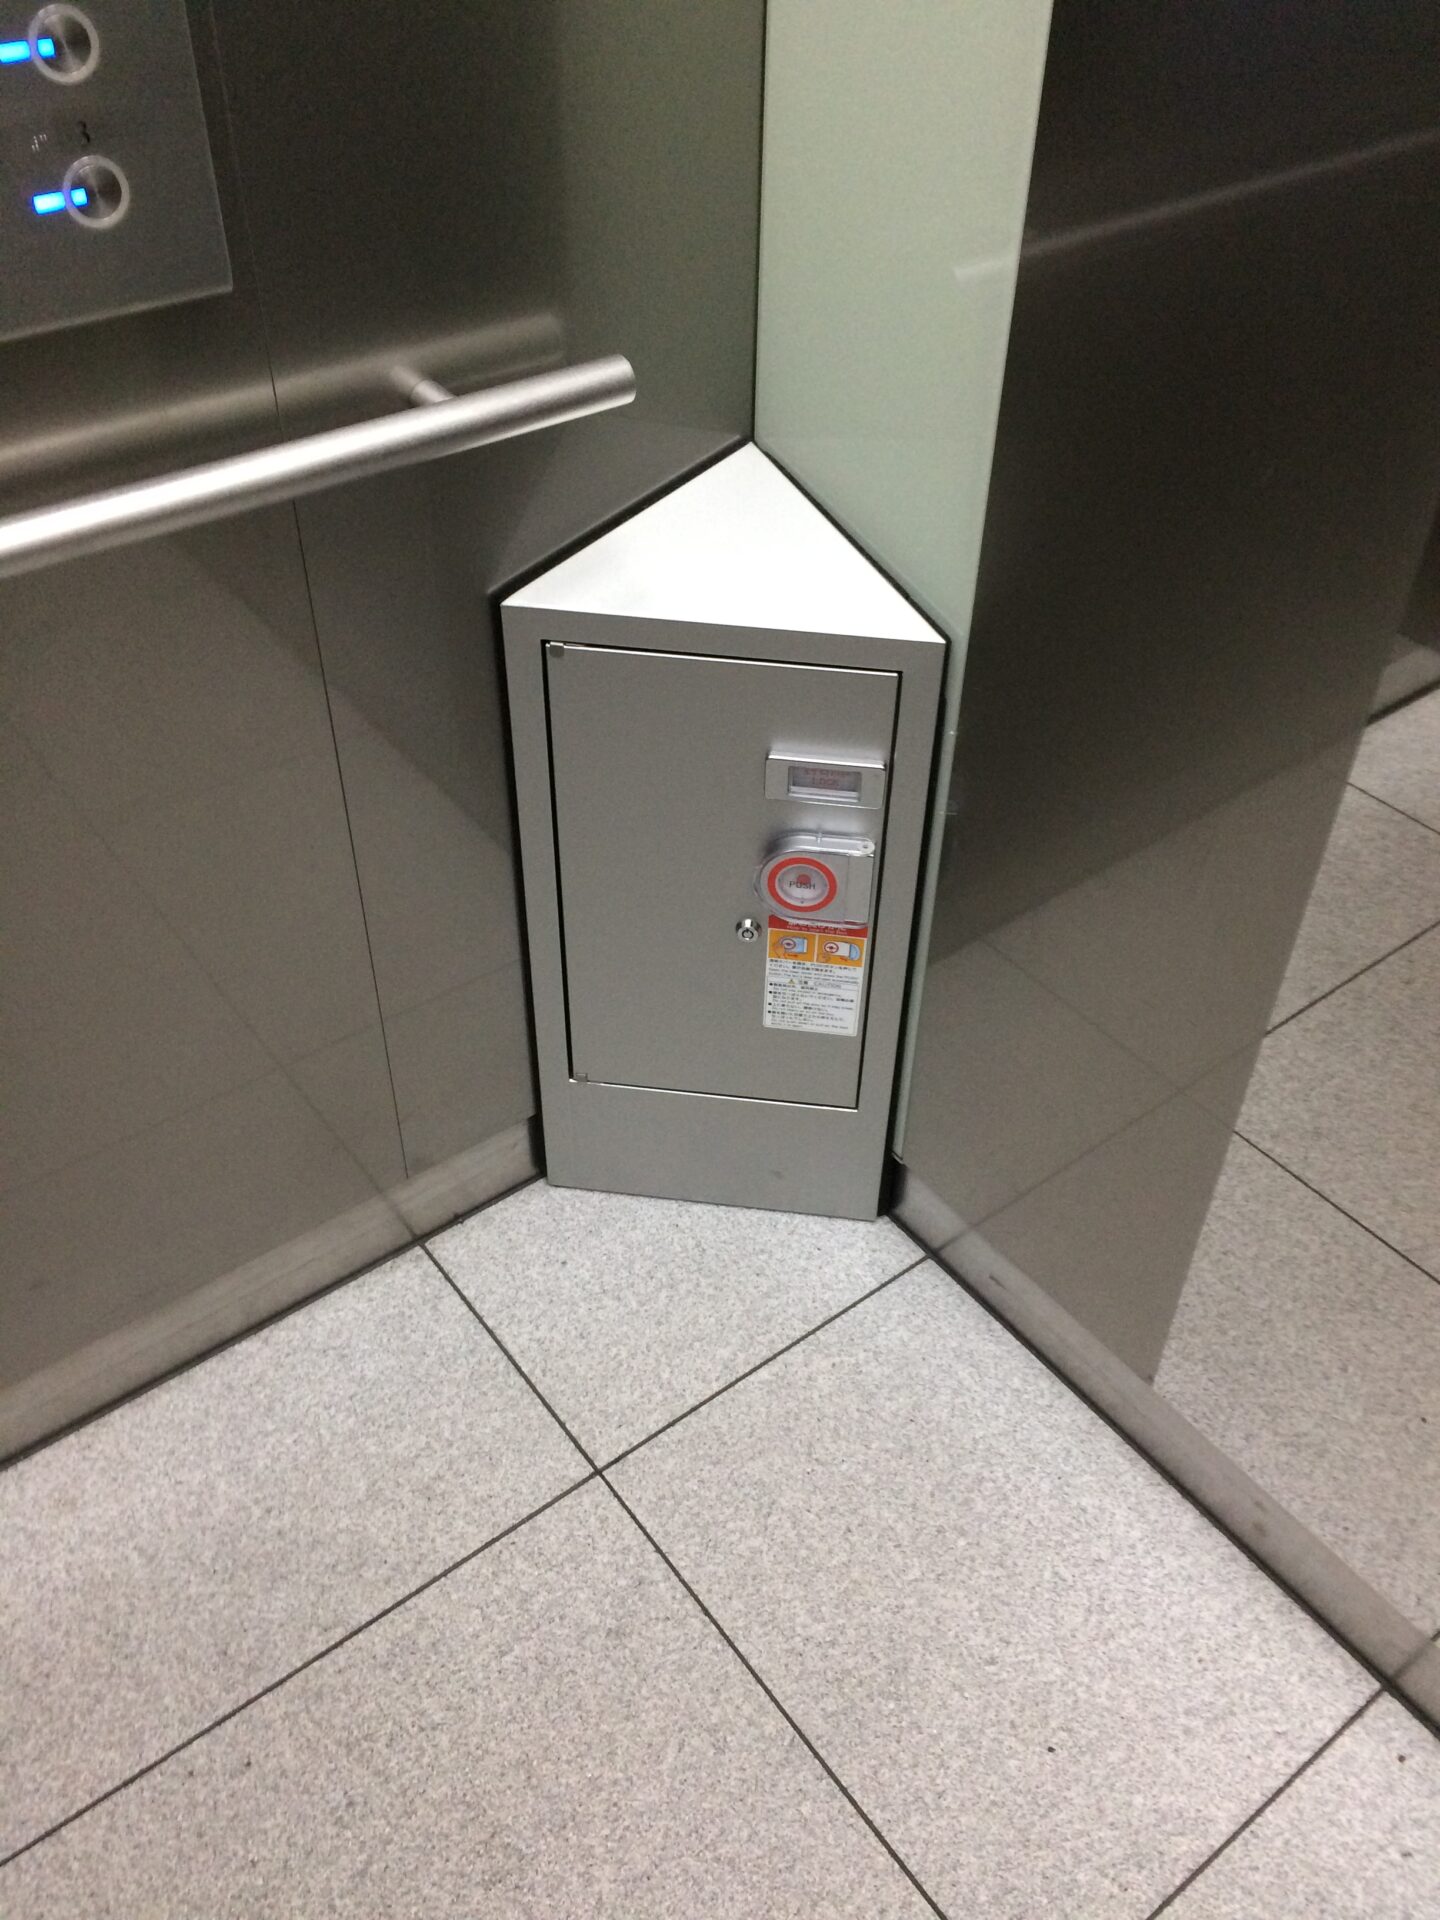 The Mysterious Triangular Box in the Elevator (Triangular prism)